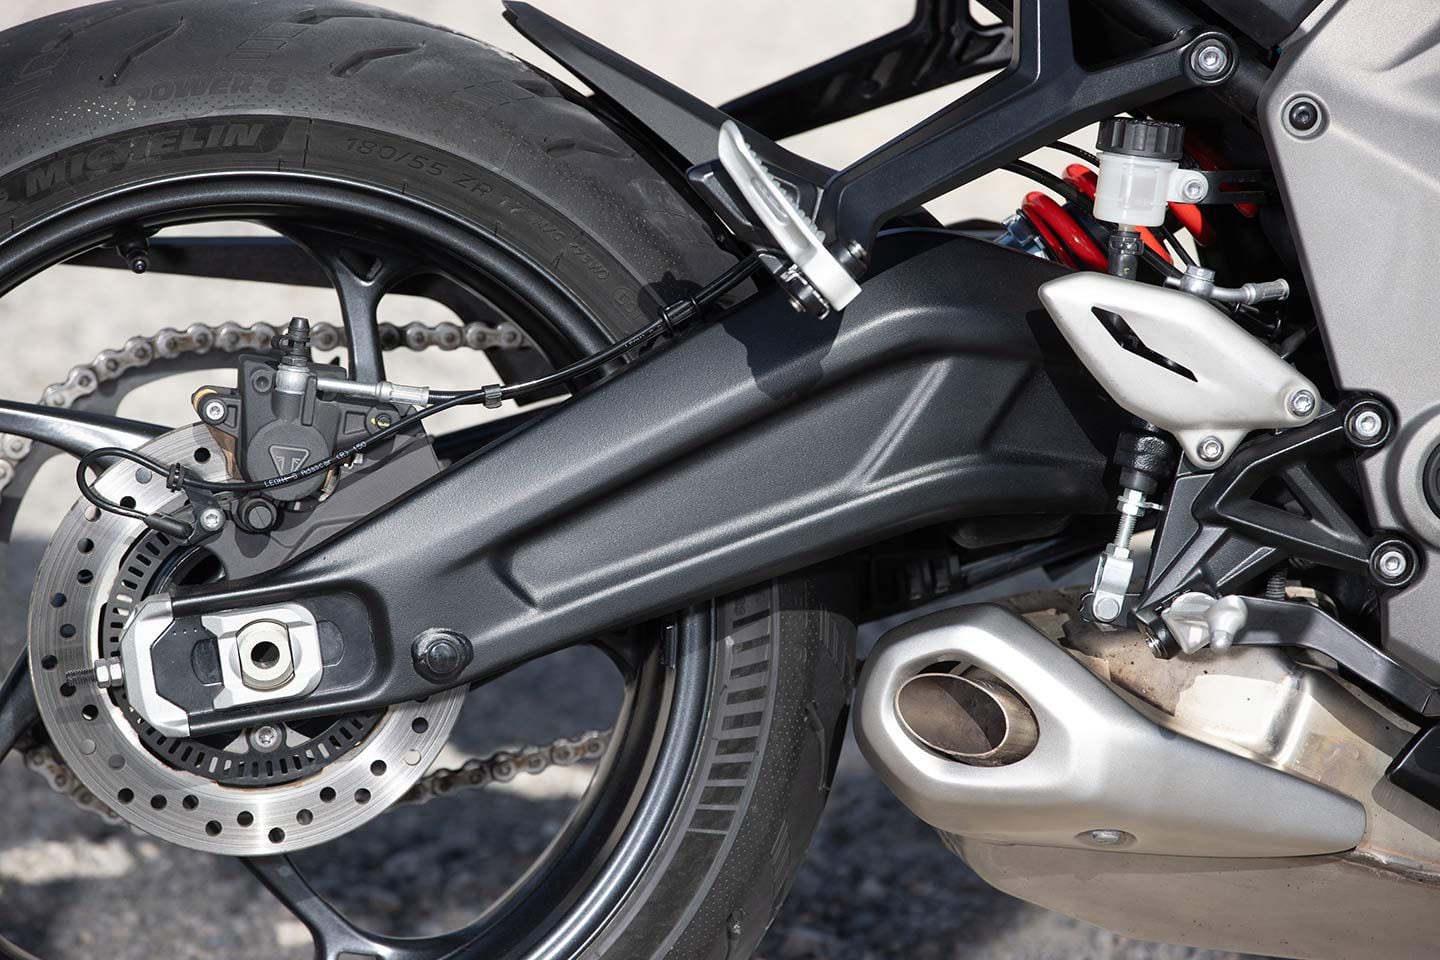 The 660’s swingarm is made of fabricated steel. The rear brake is a single-piston unit.